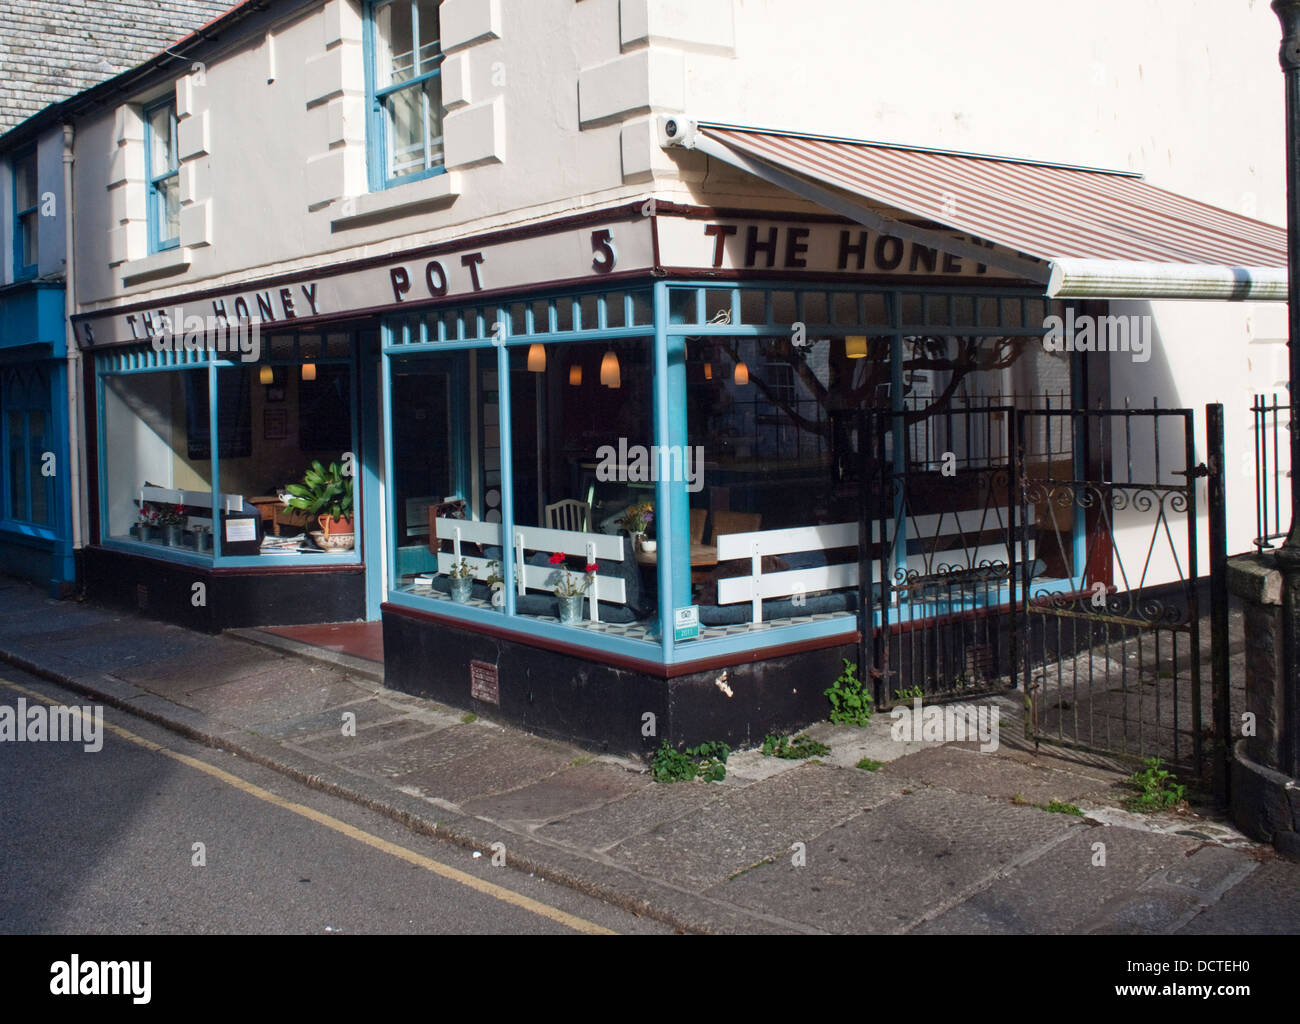 Penzance Town in Cornwall England UK The Honey Pot Cafe Stock Photo - Alamy